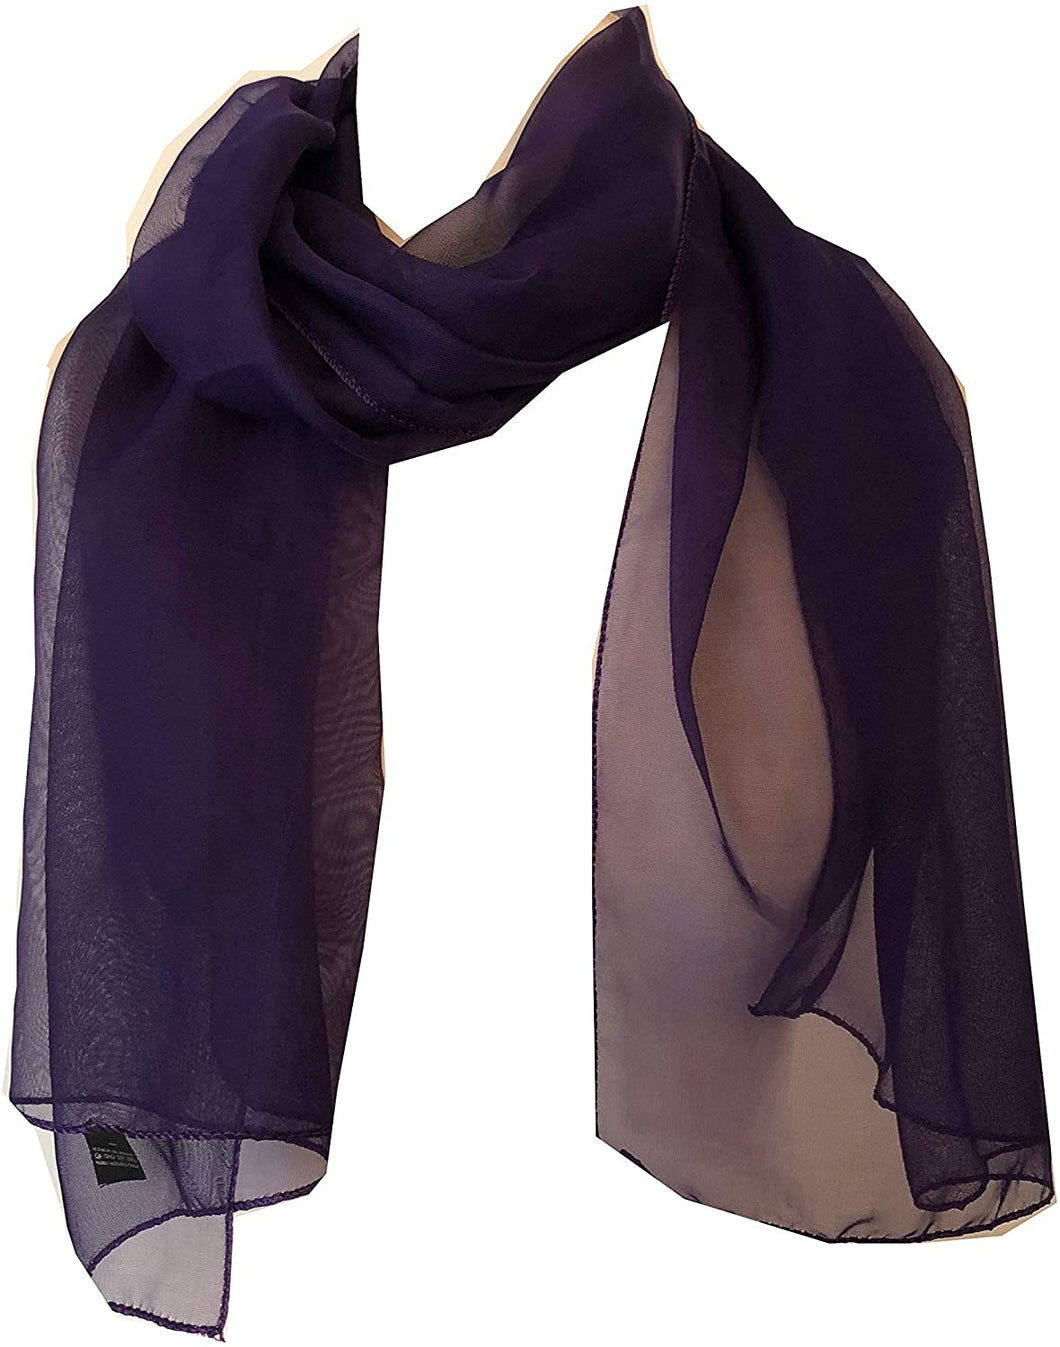 Plain Purple Chiffon Style Scarf Thin Pretty Scarf Great for Any Outfit Lovely Gift